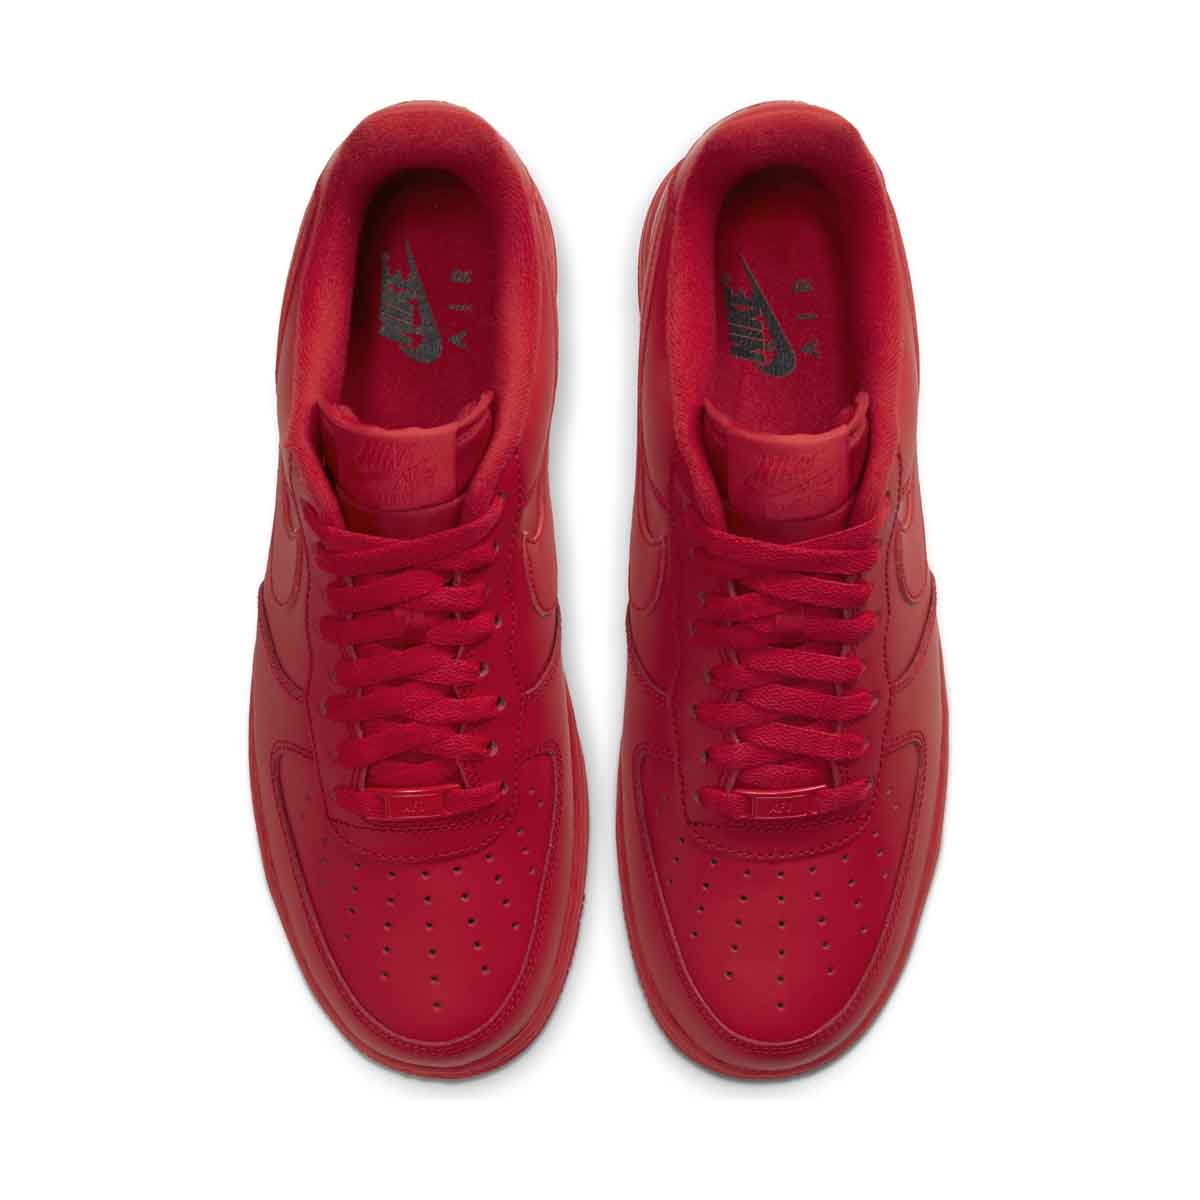 Nike Mens Air Force 1 '07 LV8 CW6999 600 Triple Red - Size 6.5